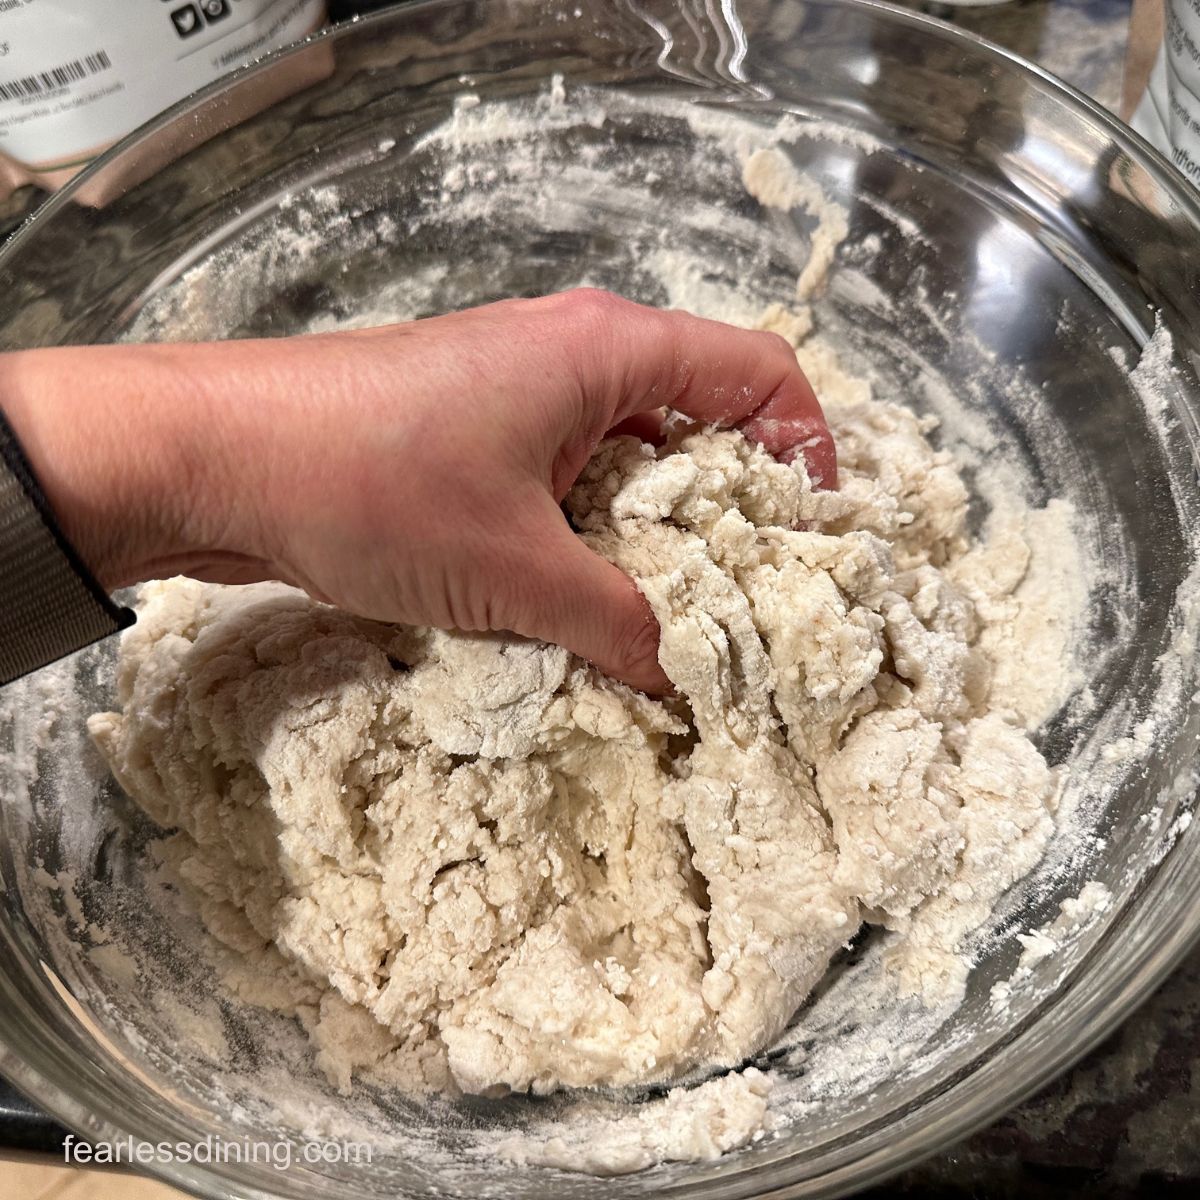 Mixing the bread dough by hand.